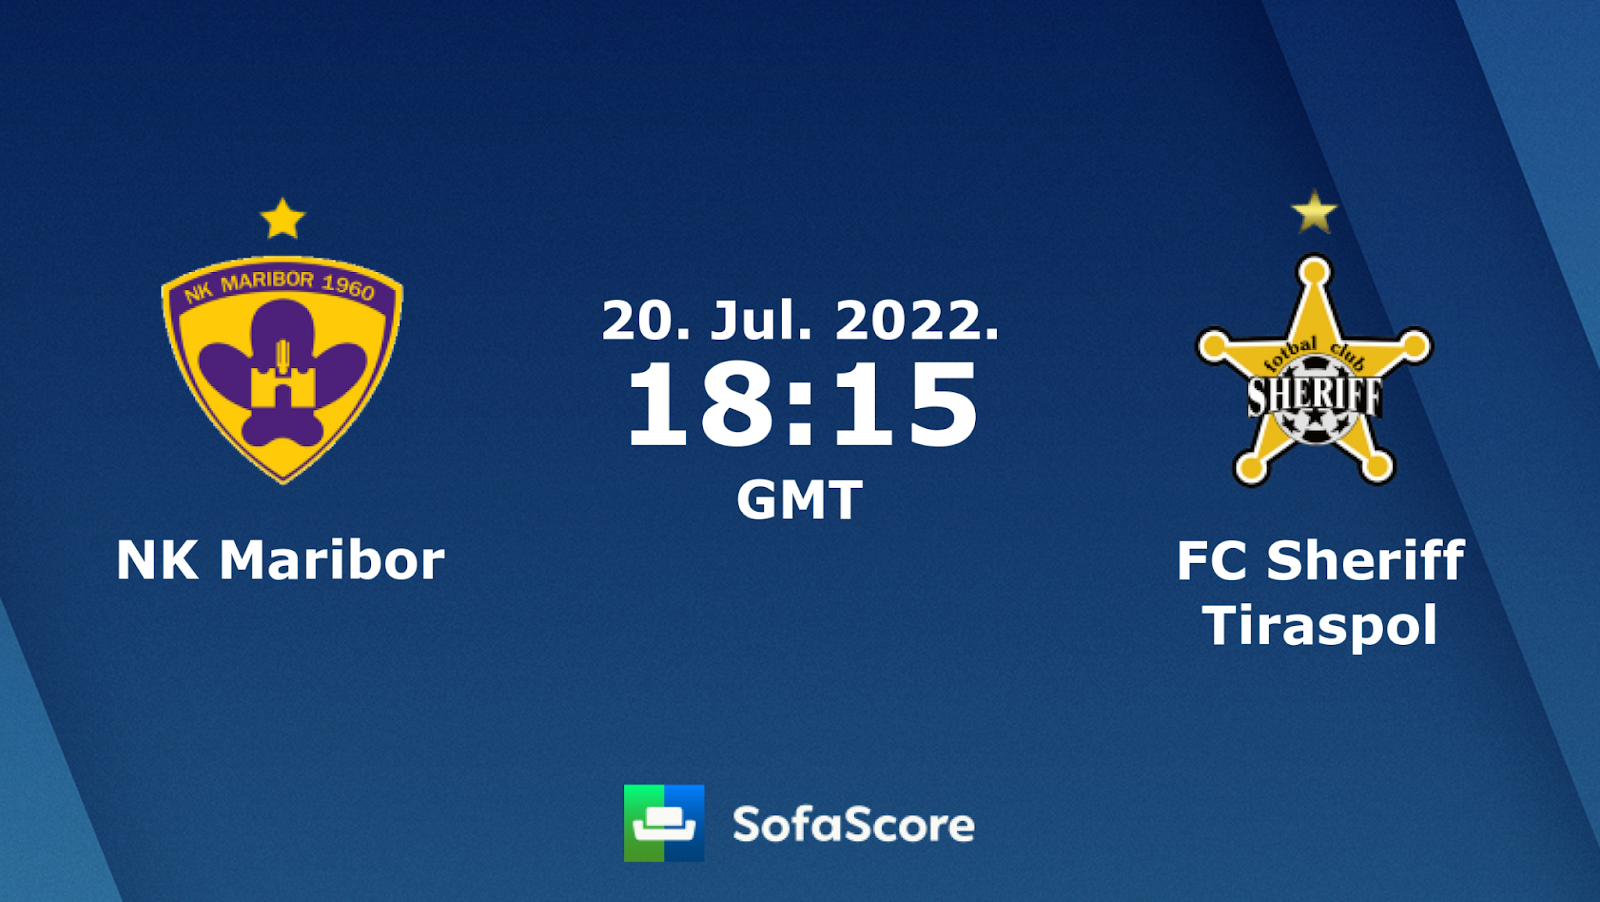 Europe champions league: Maribor vs Sheriff Tiraspol - stats, prediction, head-to-head, lineups, live stream, and ground. The second qualifying round for the 2022-23 Champions League campaign will continue with Maribor set to face Sheriff Tiraspol for their first leg encounter.